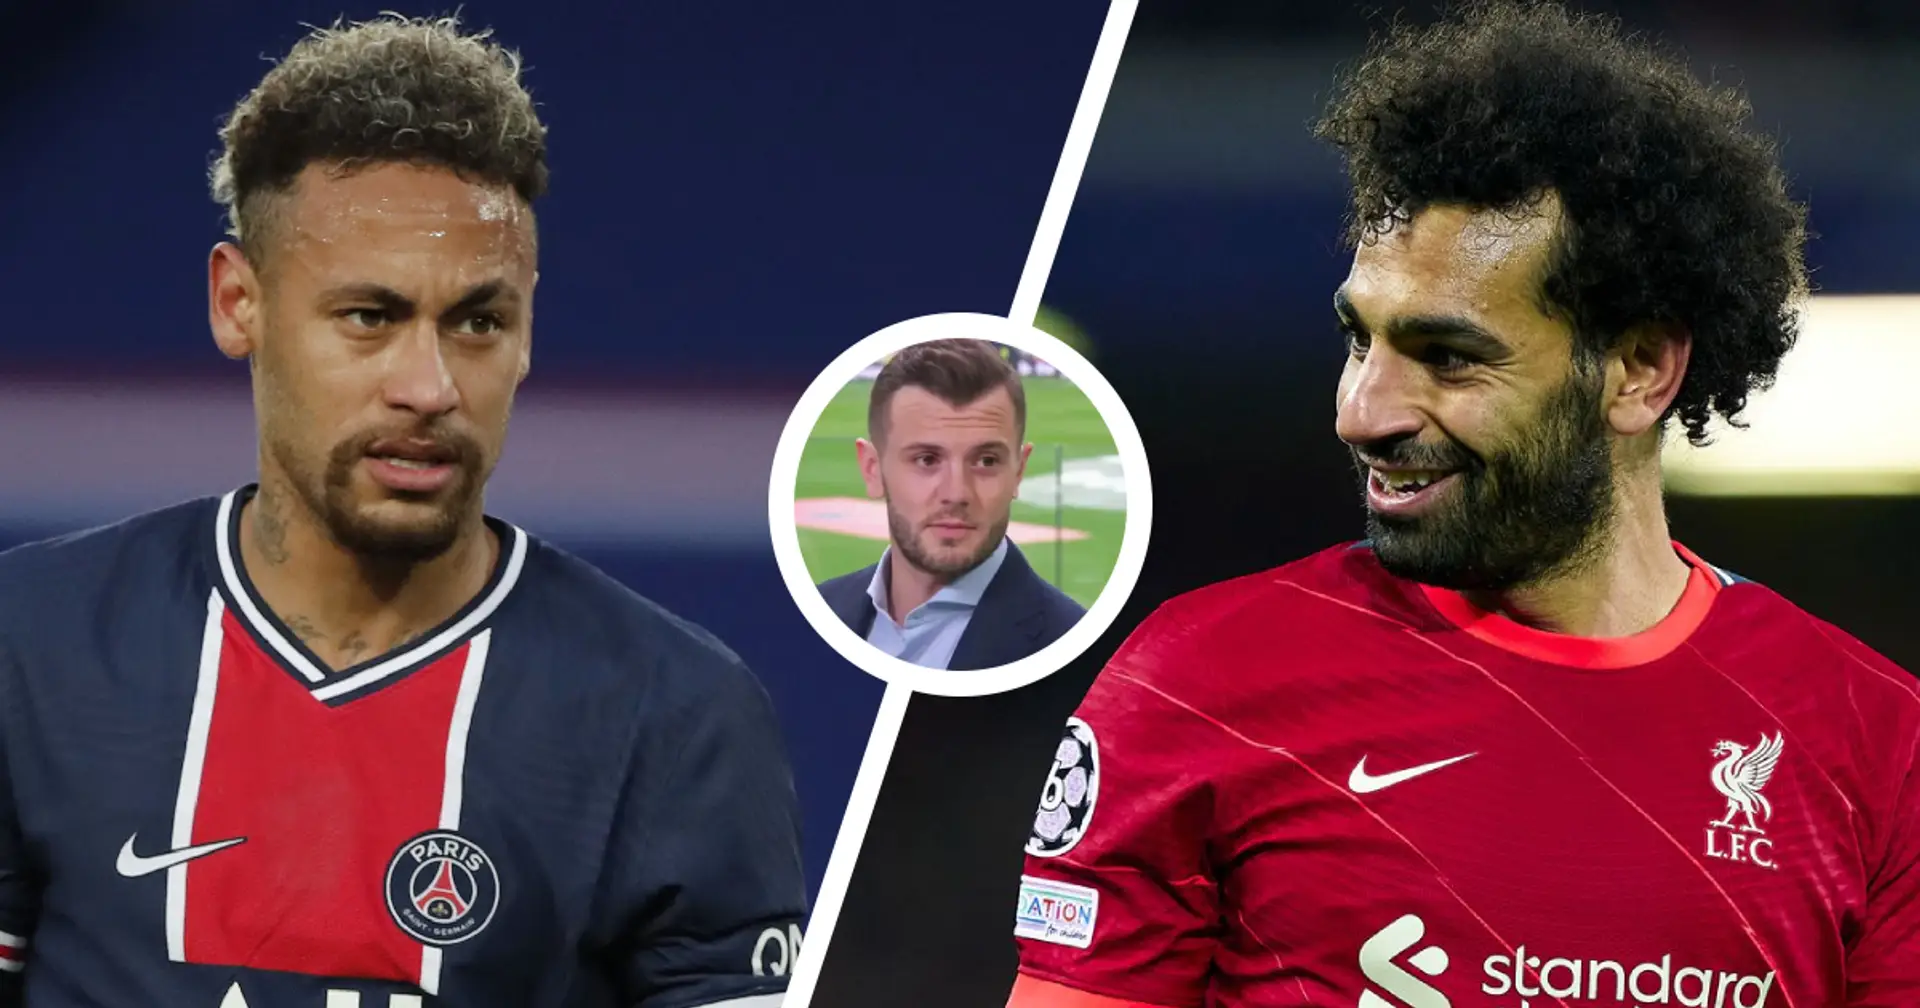 'Best player in the world': Ex-Arsenal man Wilshere heaps praise on Salah when asked about Neymar comparison